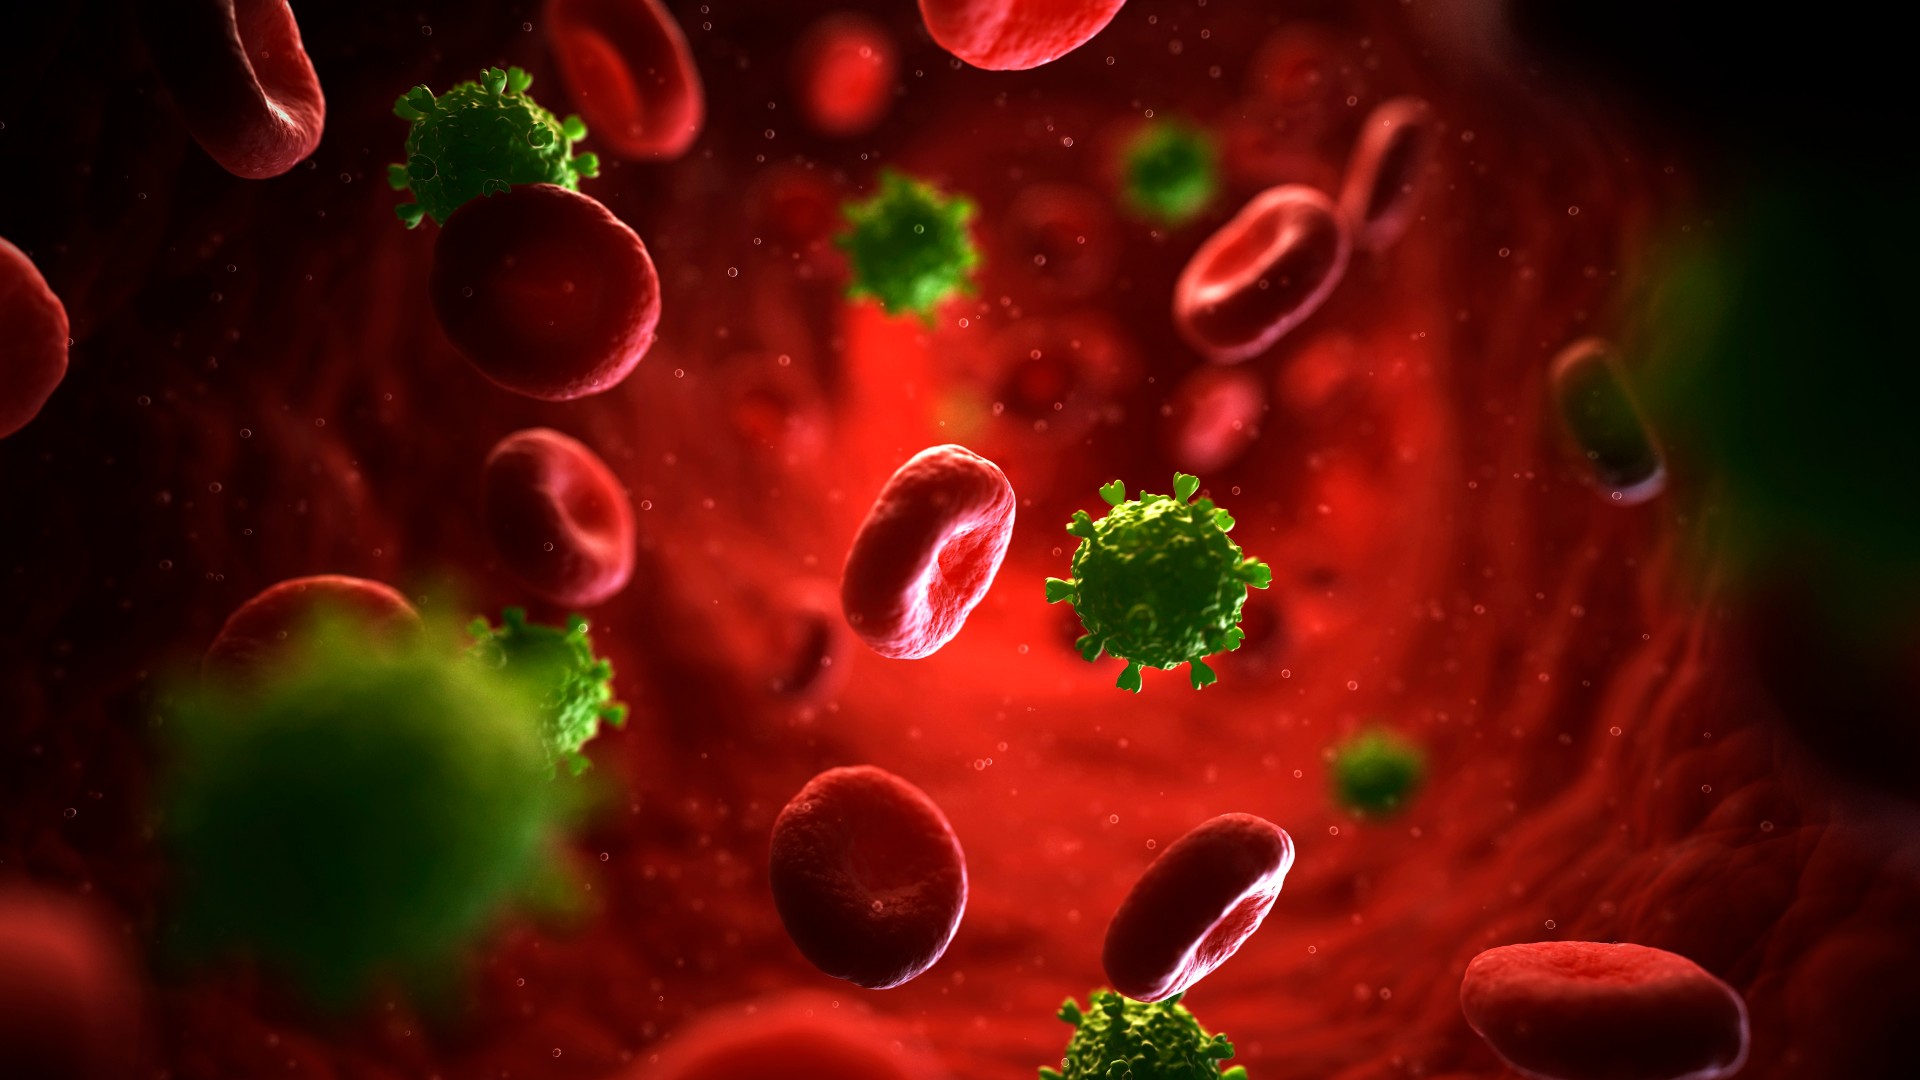 illustration of HIV particles in bloodstream